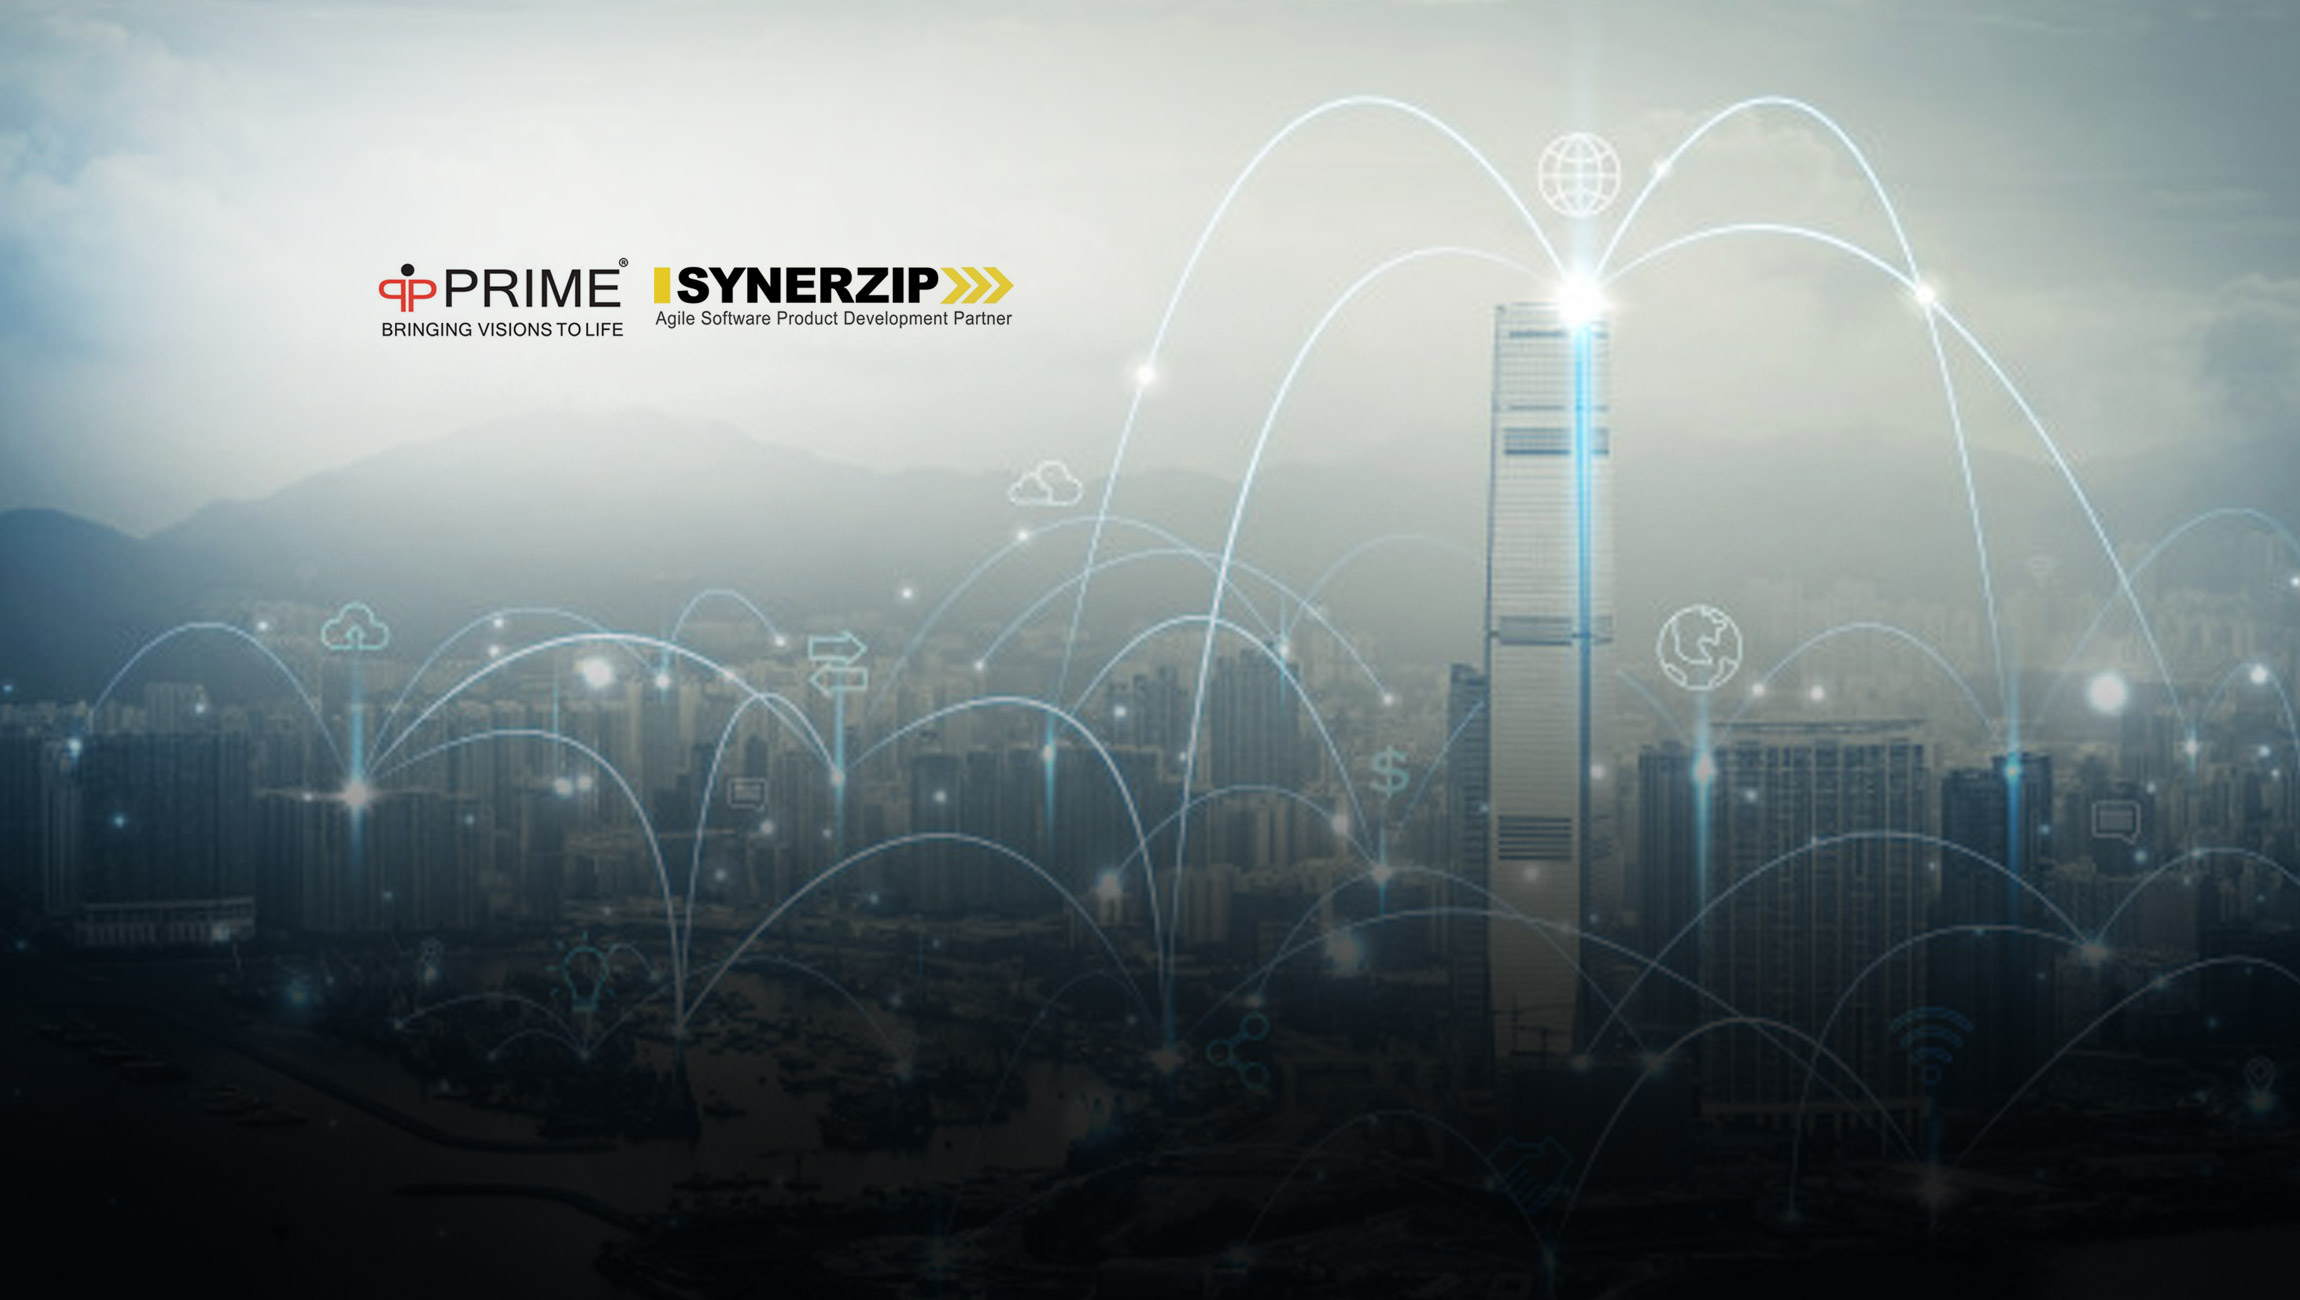 Prime and Synerzip Join Hands to Accelerate Digital Transformation